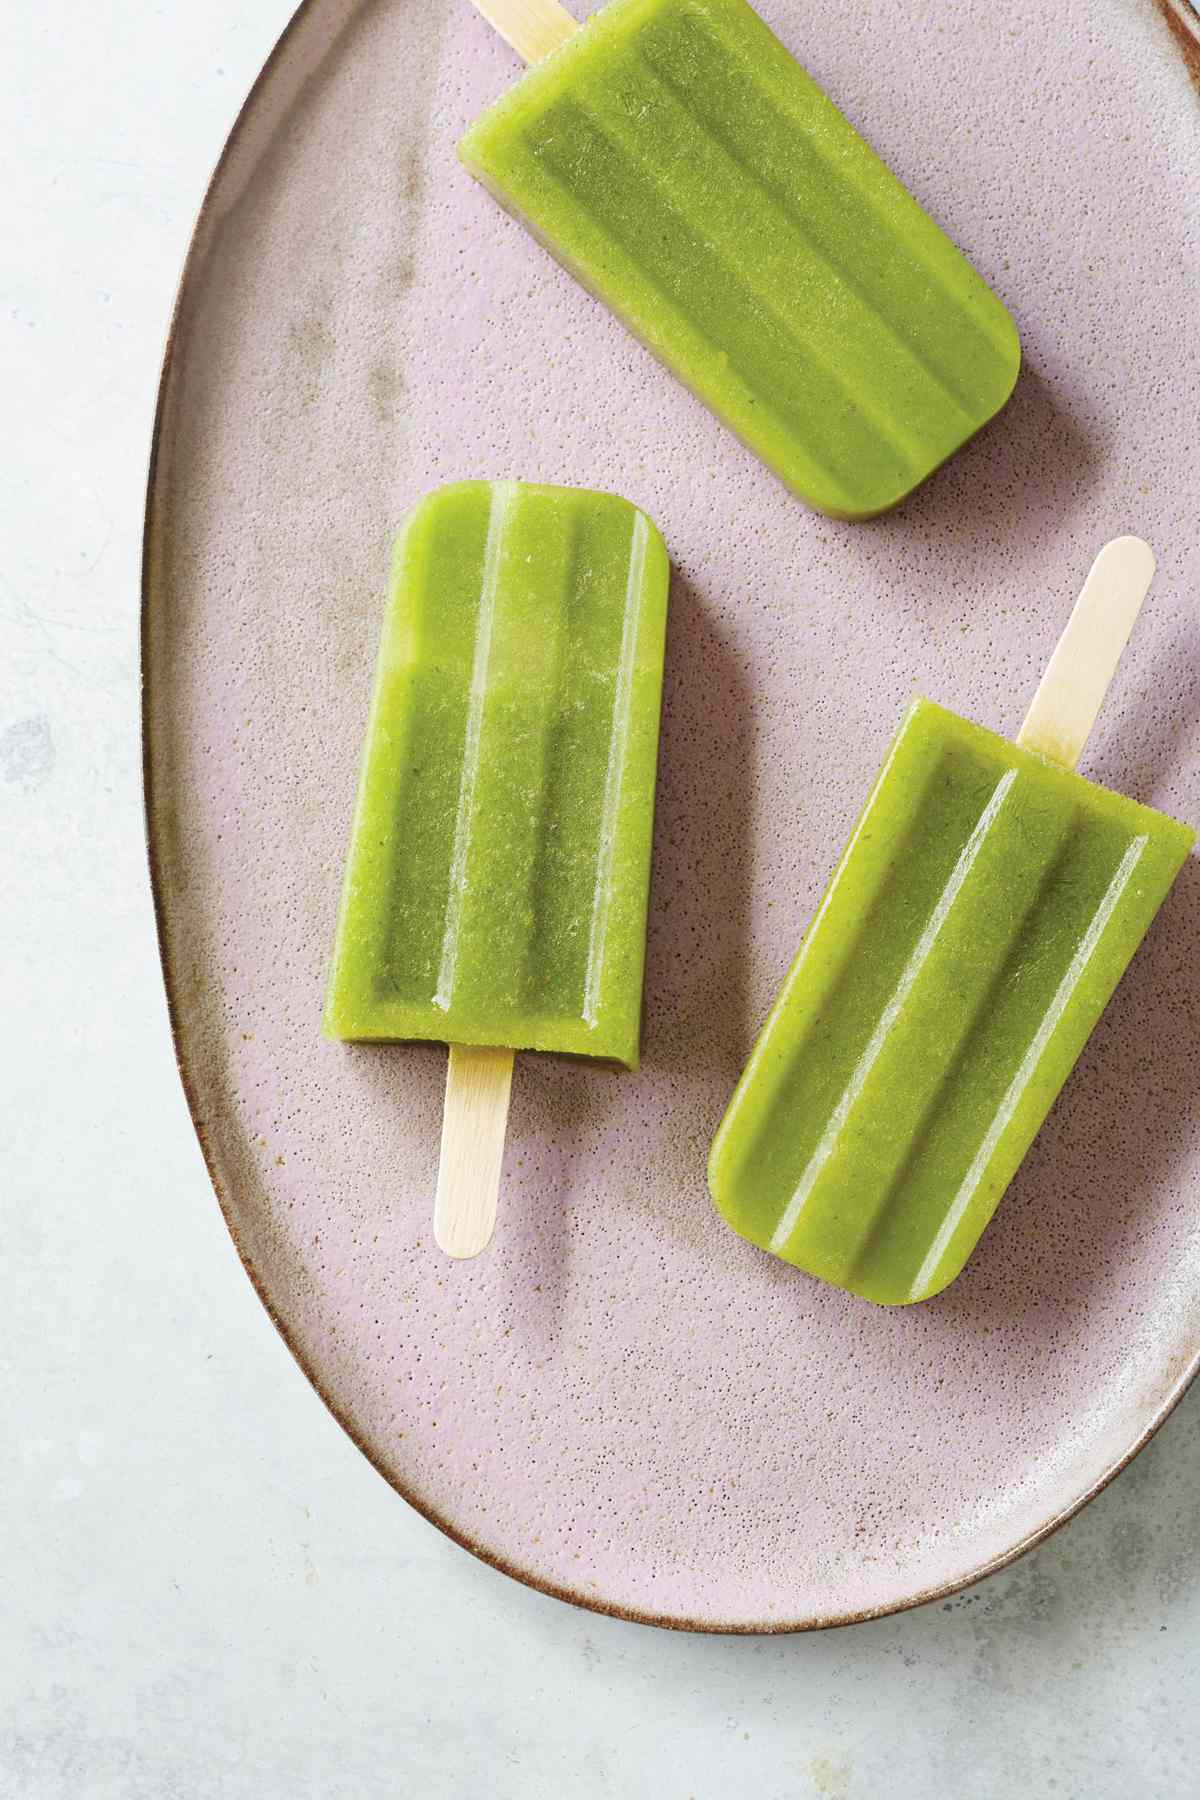 Spicy Pineapple-Greens Popsicle 